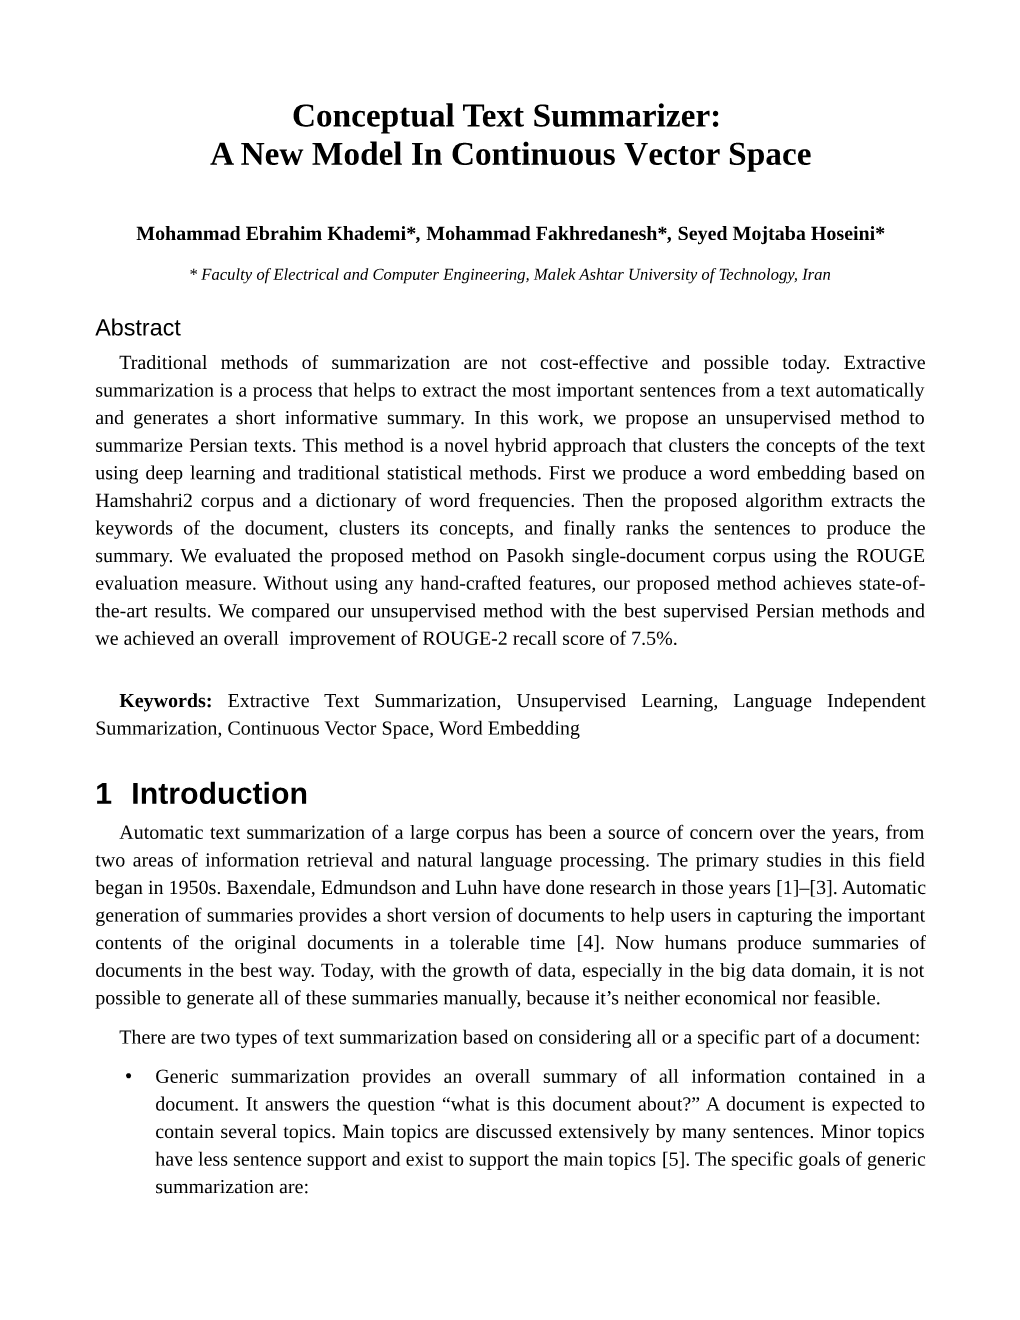 Conceptual Text Summarizer: a New Model in Continuous Vector Space